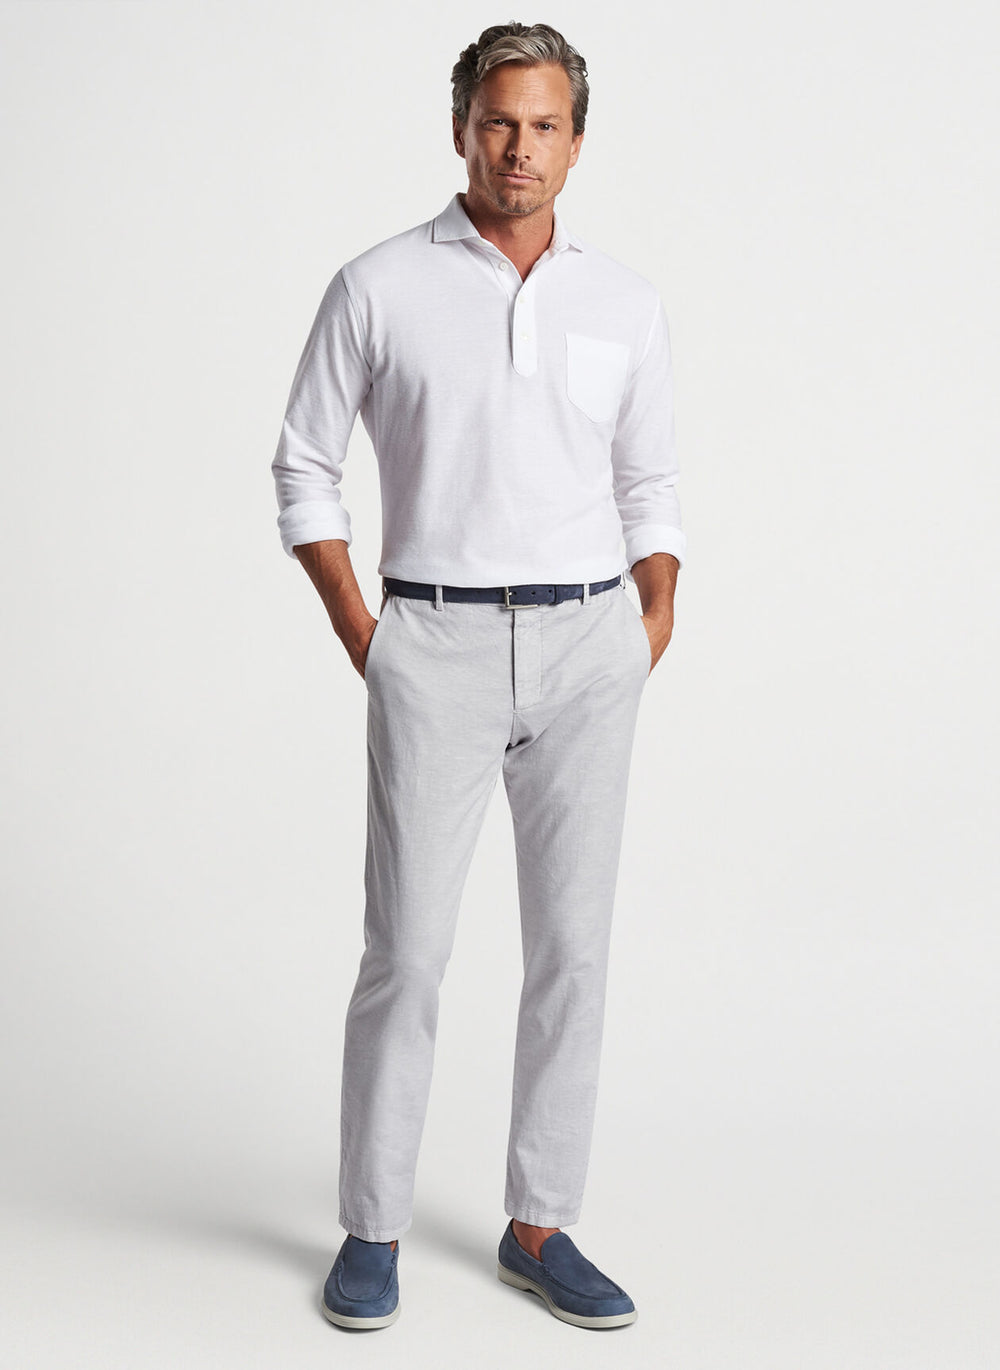 Peter Millar Croxley Long-Sleeve Polo In White